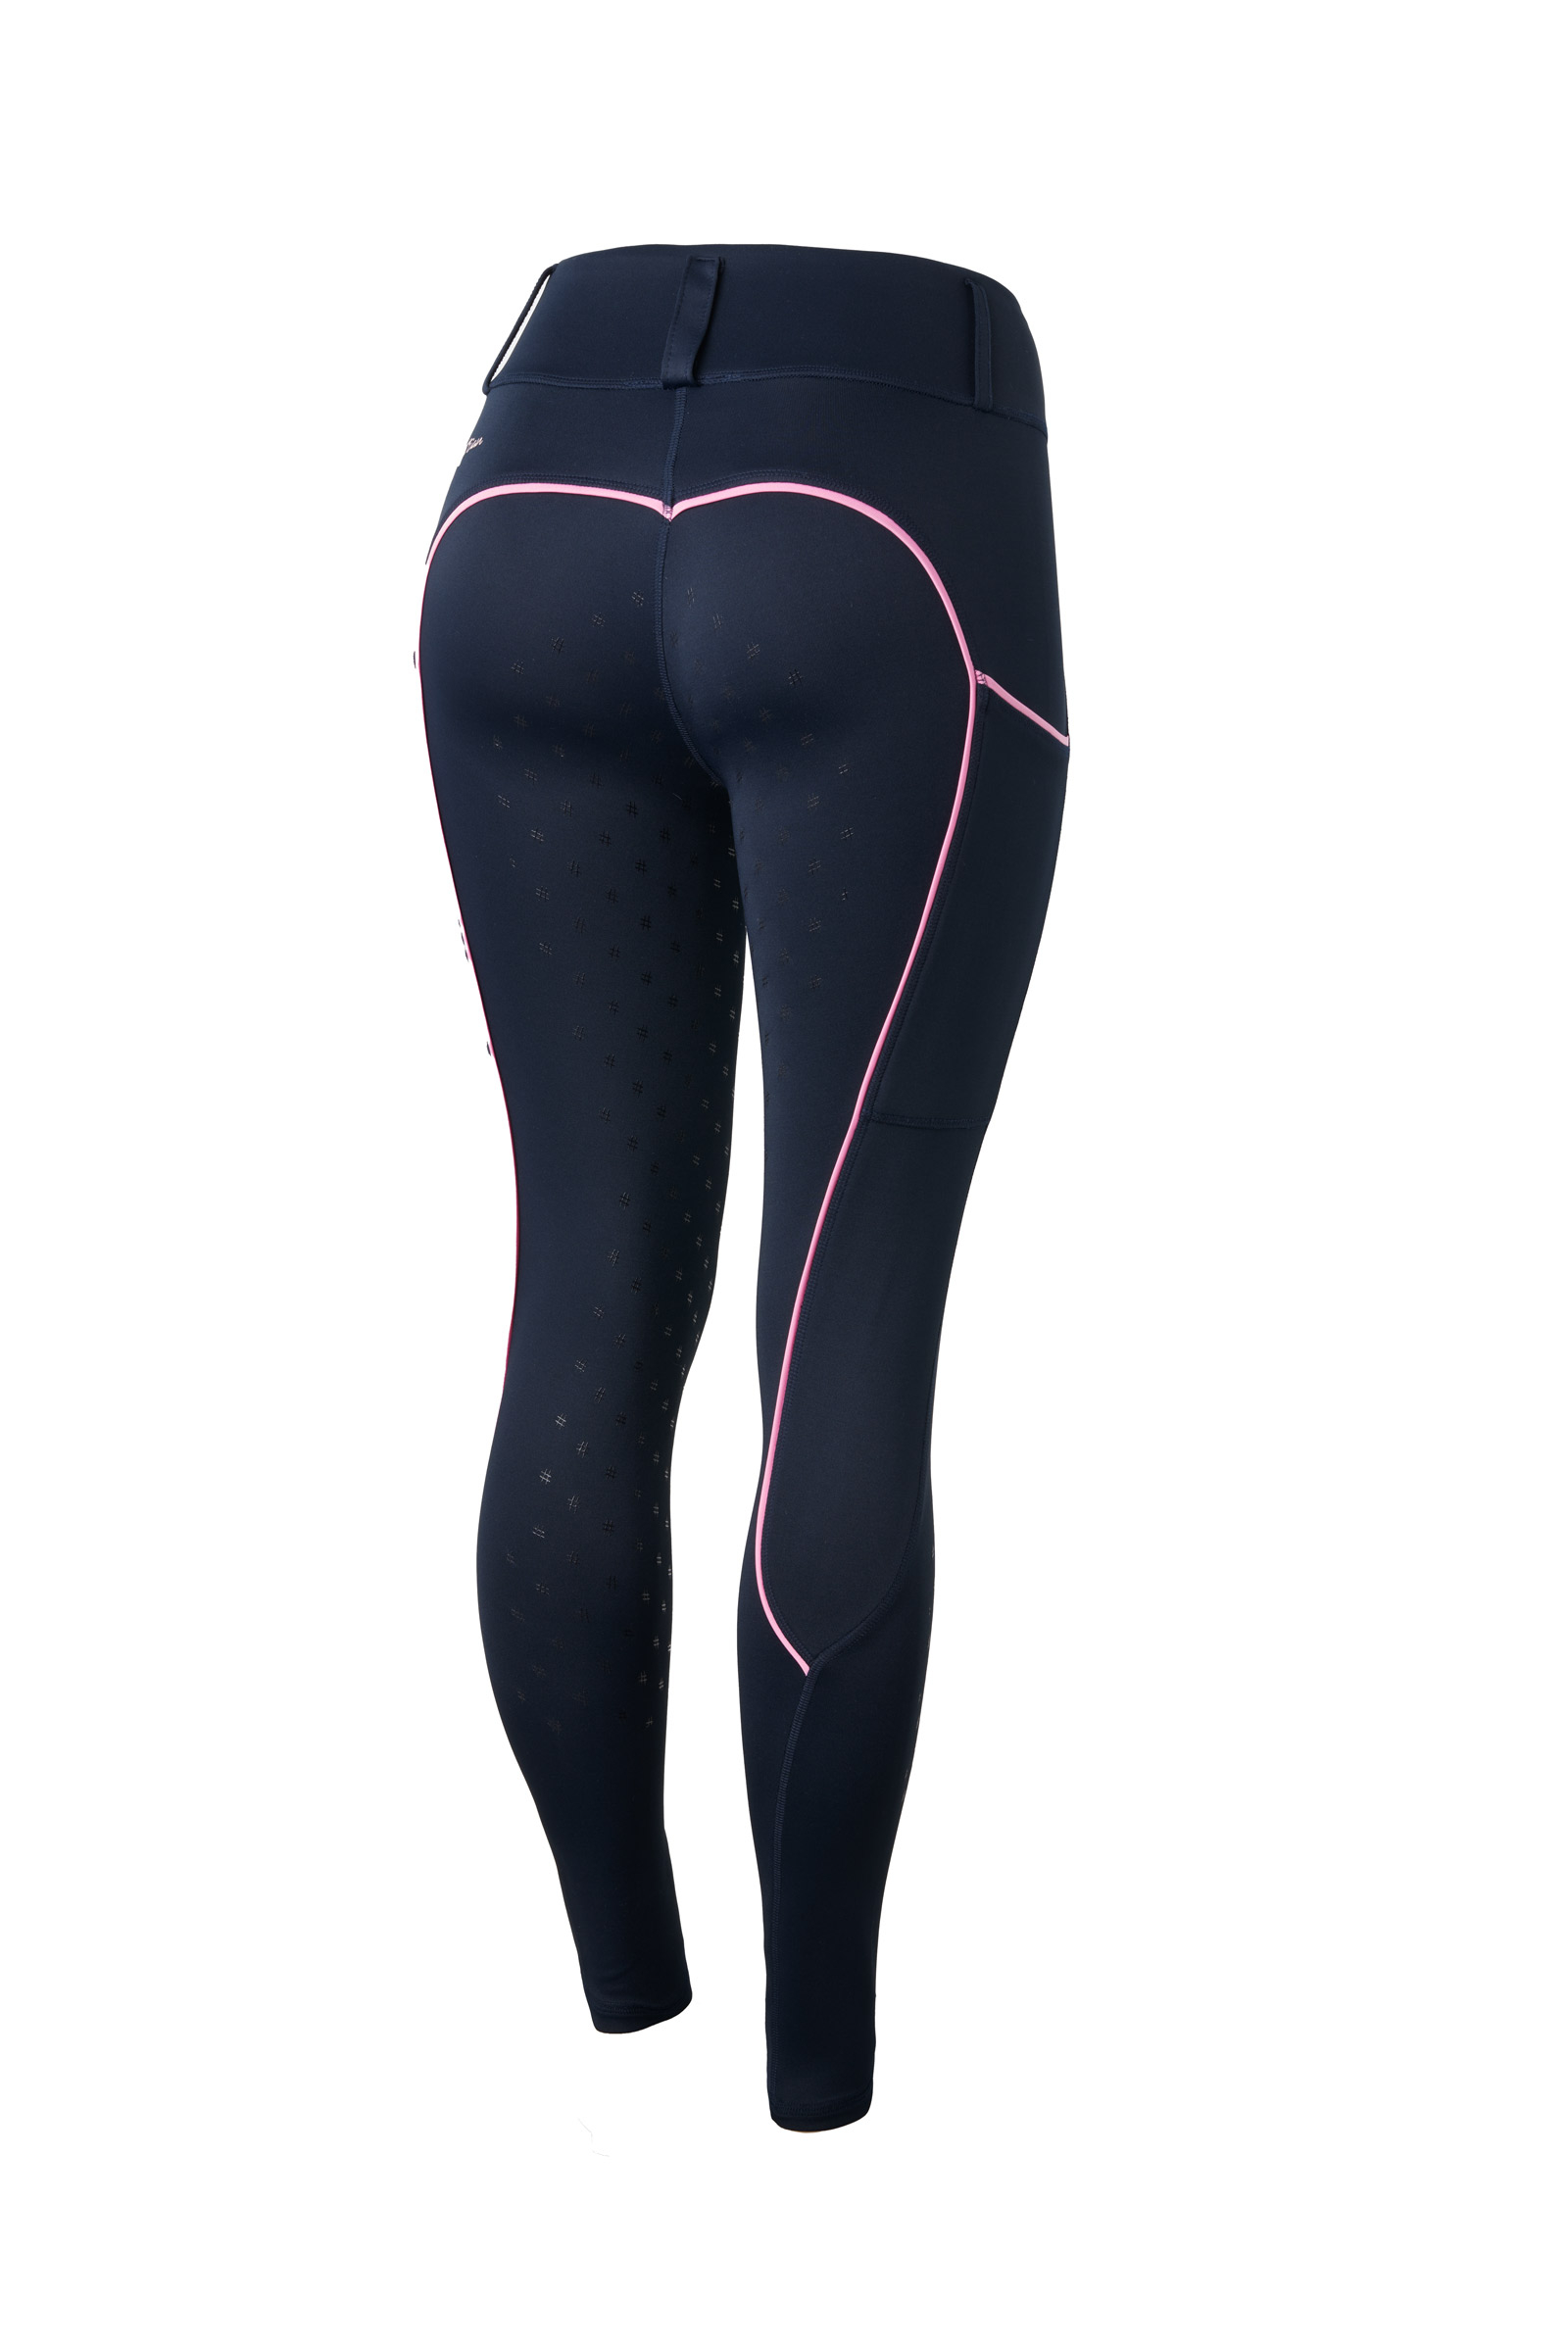 Horze Emery Young Fullseat Tights